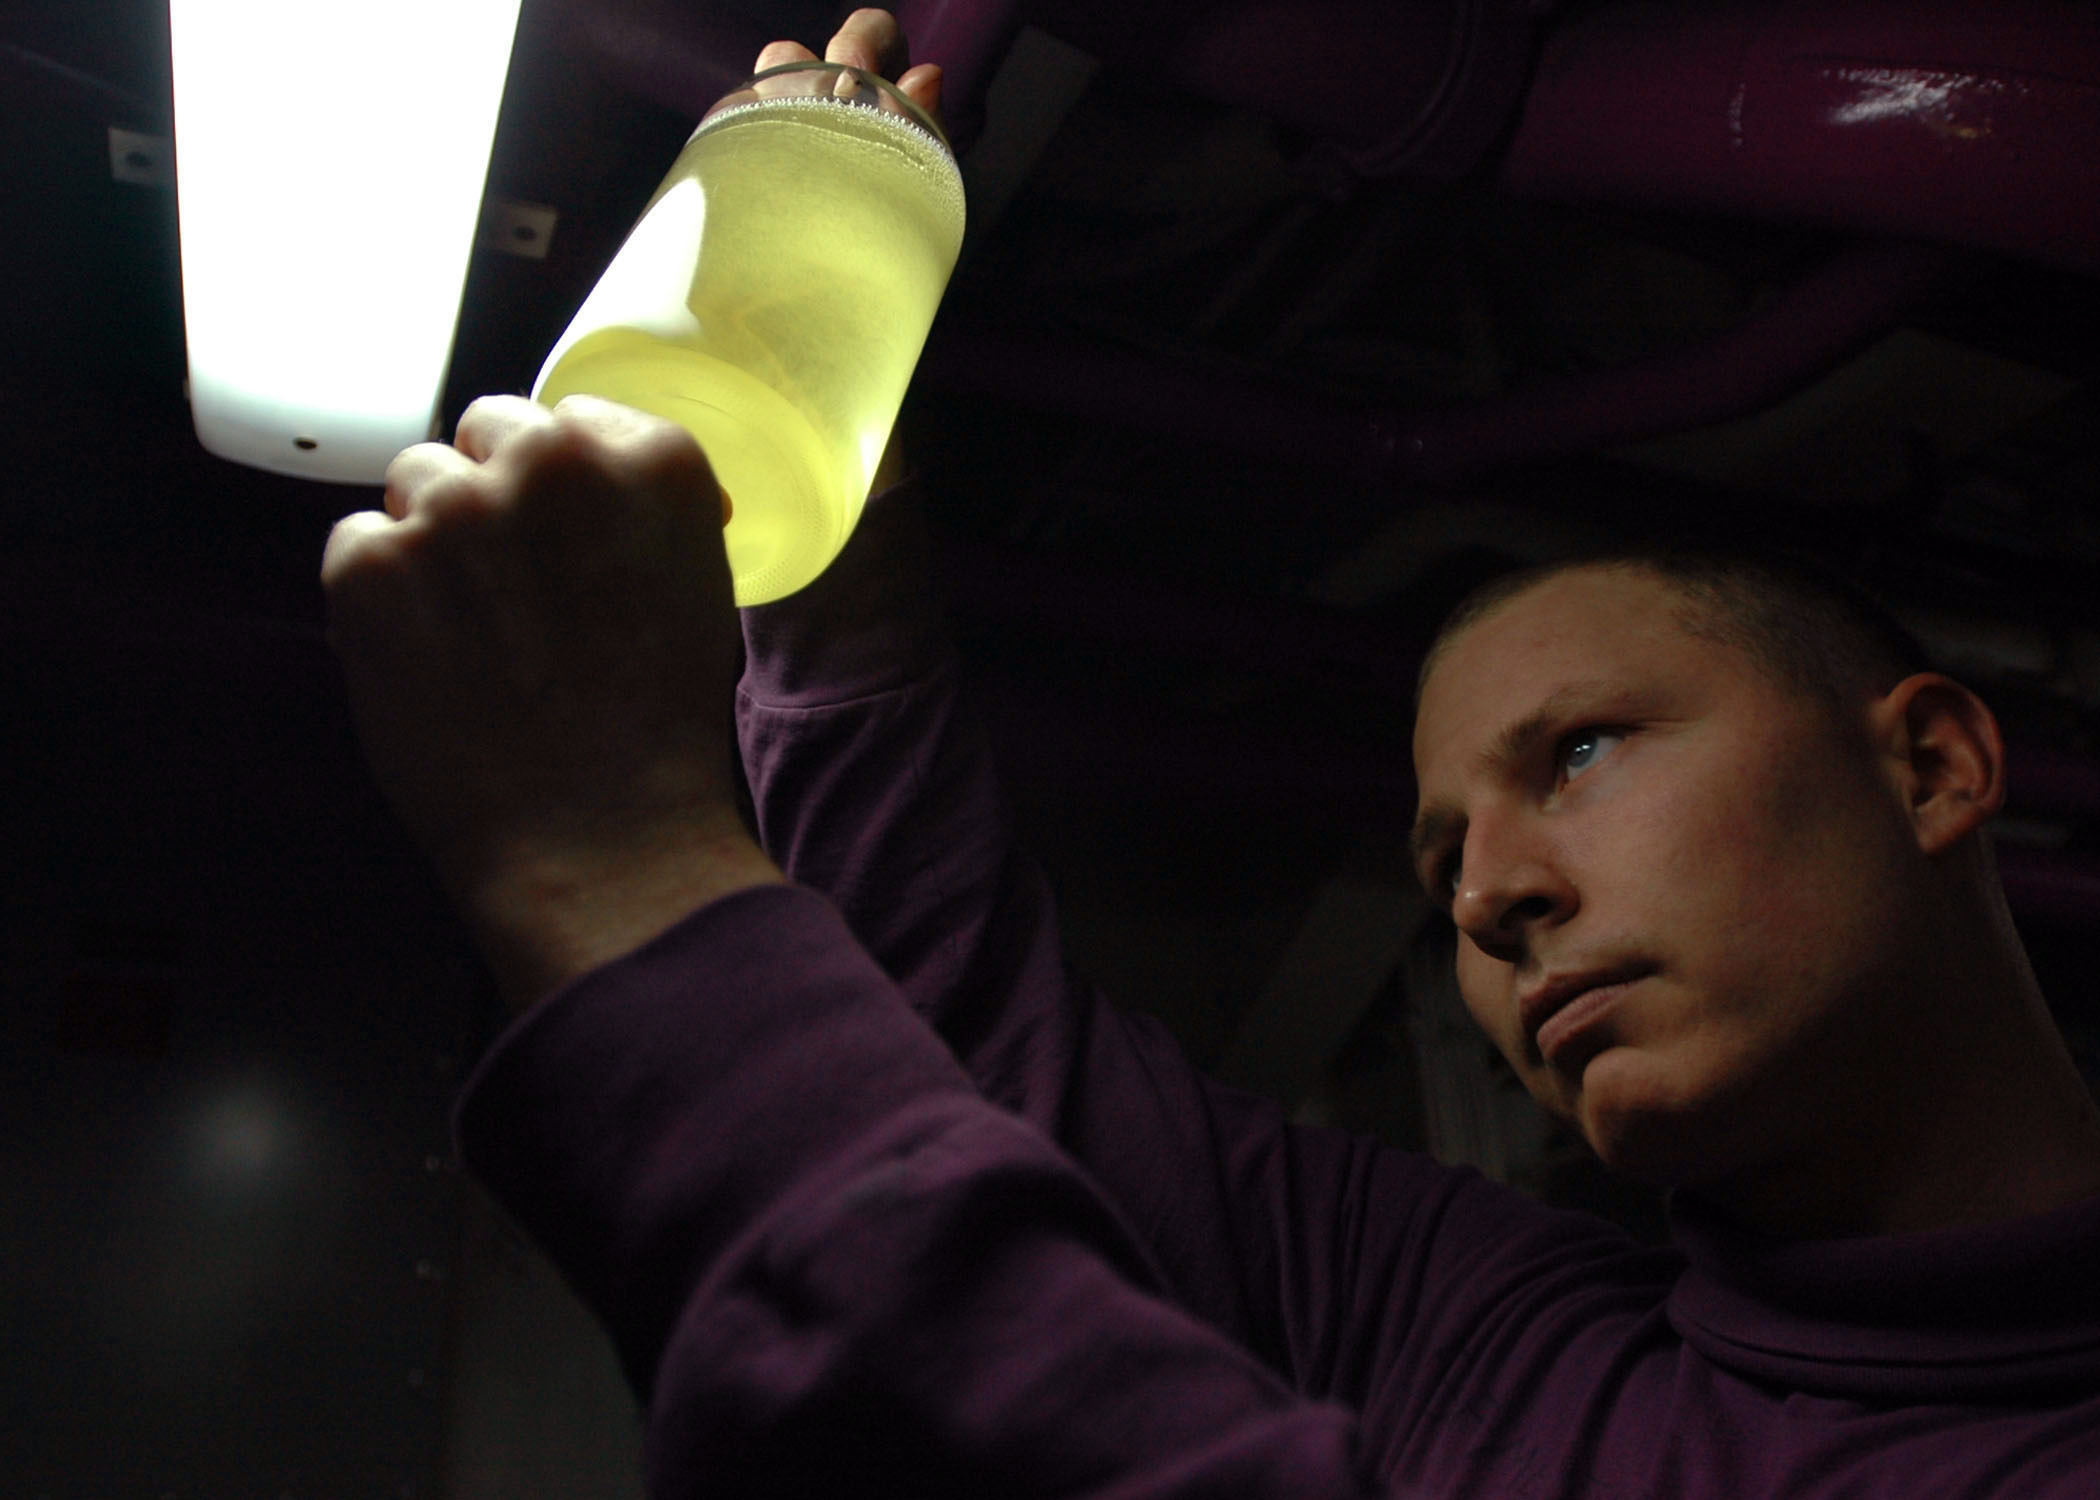 US Navy 070117-N-2659P-091 Aviation Boatswain's Mate (Fuel) 2nd Class Leo Meister inspects the quality of JP5 jet fuel in an aviation fuels pump room aboard USS John C. Stennis (CVN 74)